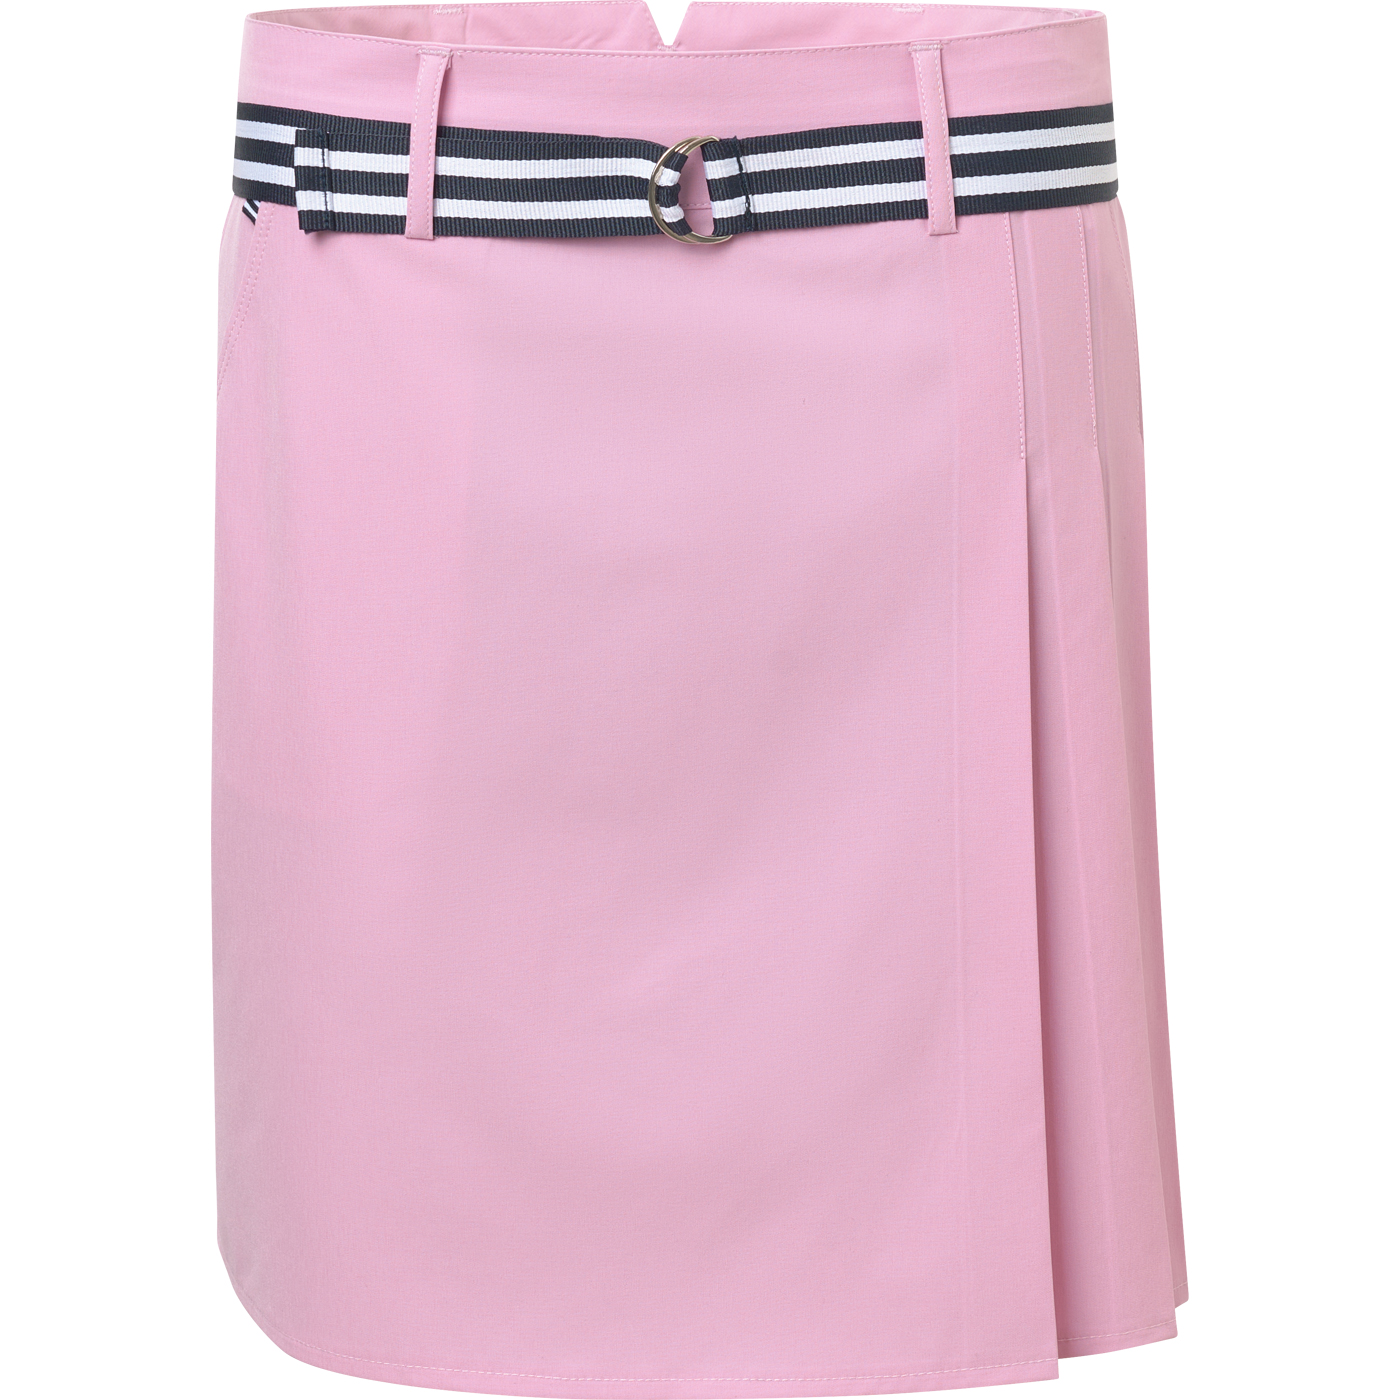 Lds Kildare skort 50cm - peony in the group WOMEN / All clothing at Abacus Sportswear (2976390)